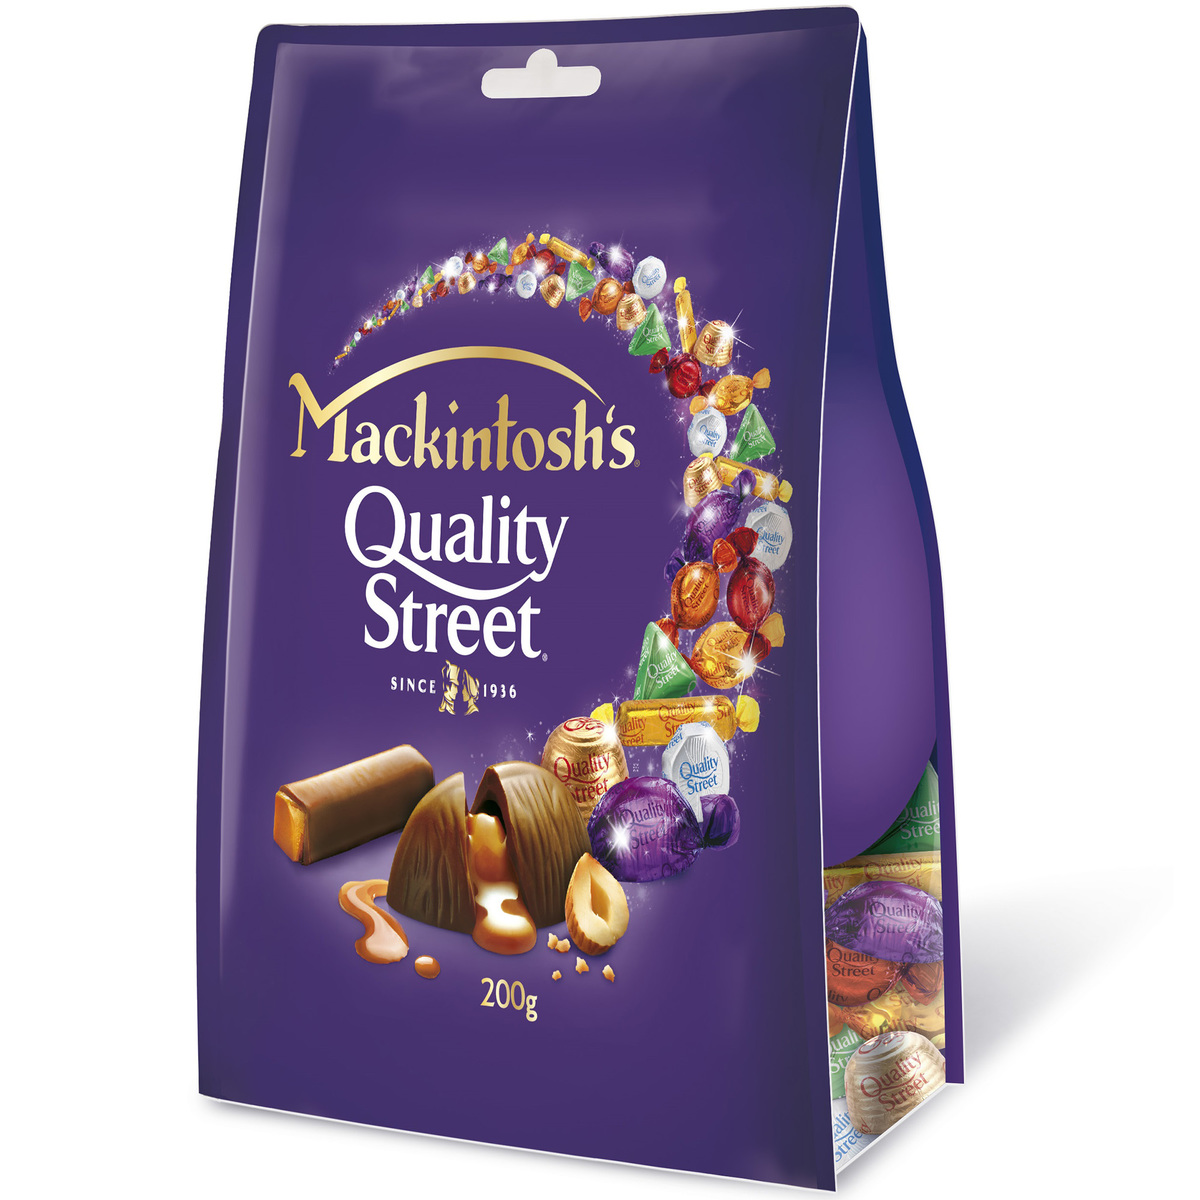 Nestle Mackintoshs Quality Street Chocolate Chocolate 200g Online At Best Price Boxed 0623